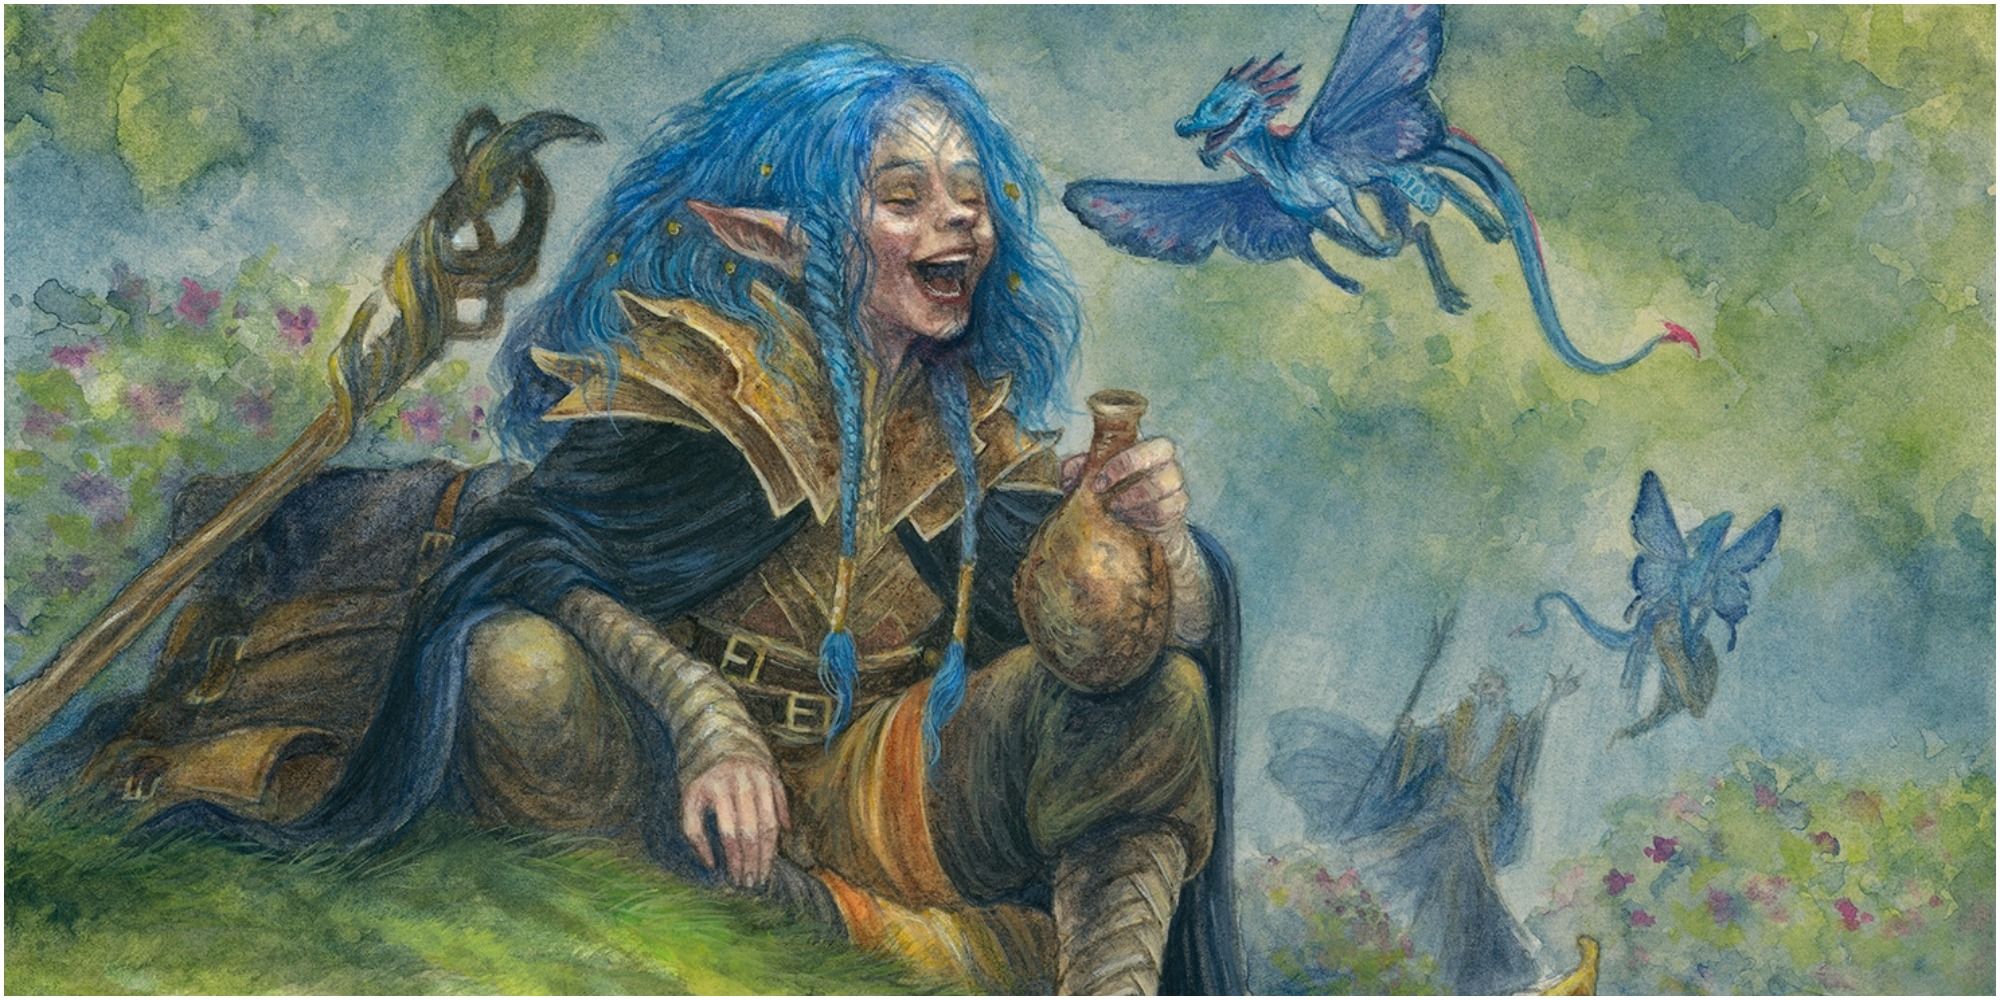 A Feywild Trickster Archfey Warlock laughing while it rests on the grass.